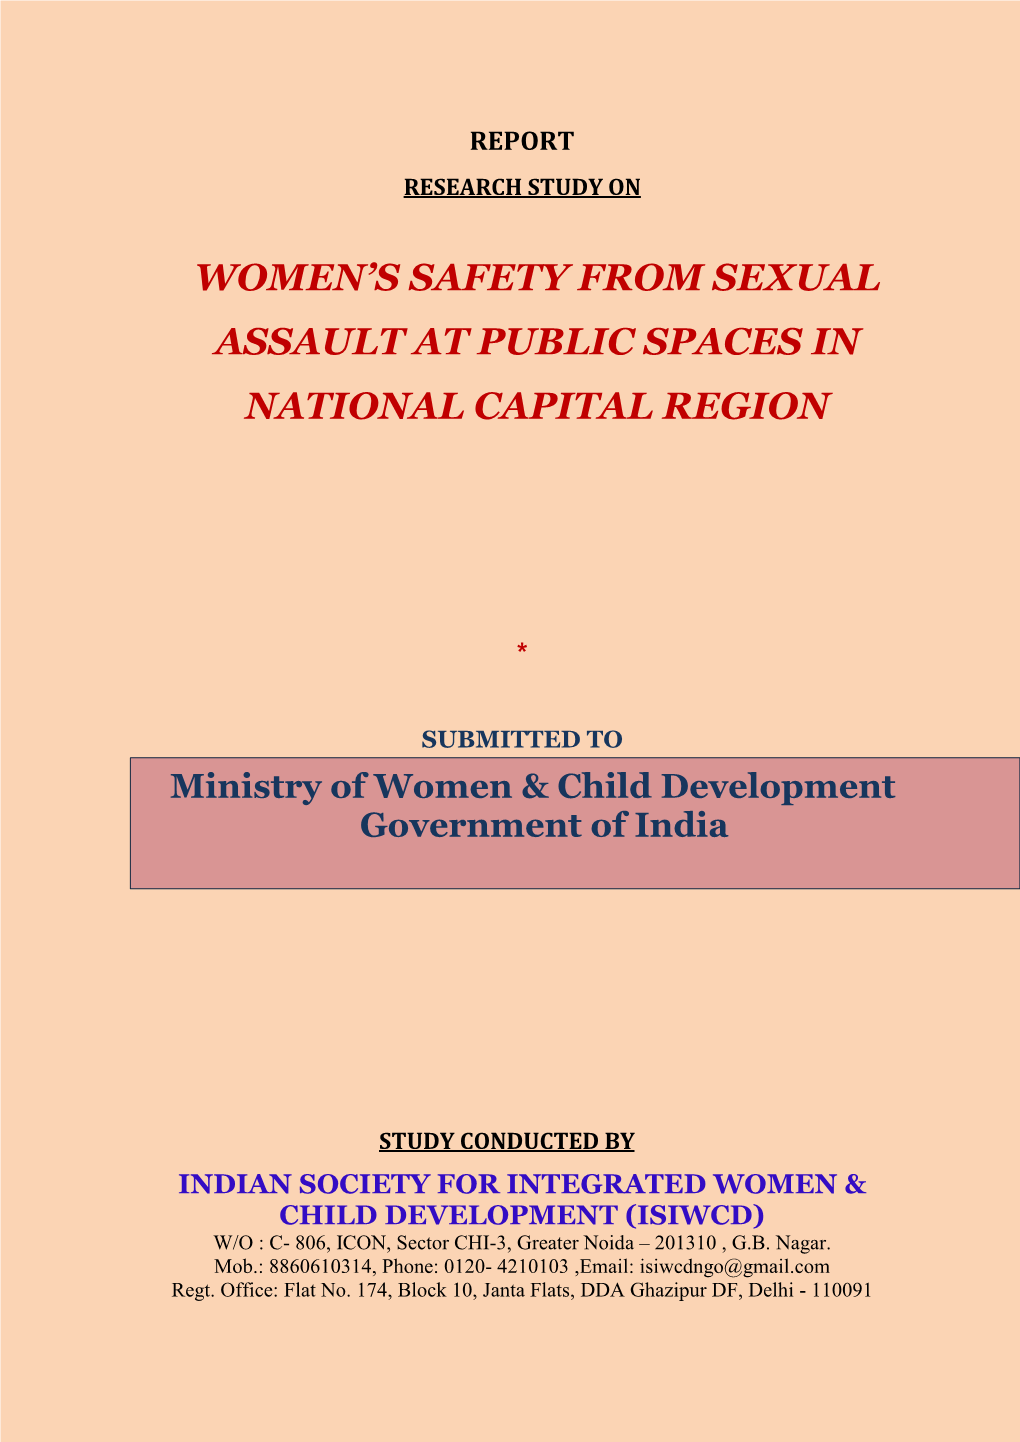 Women's Safety from Sexual Assault at Public Spaces in National Capital